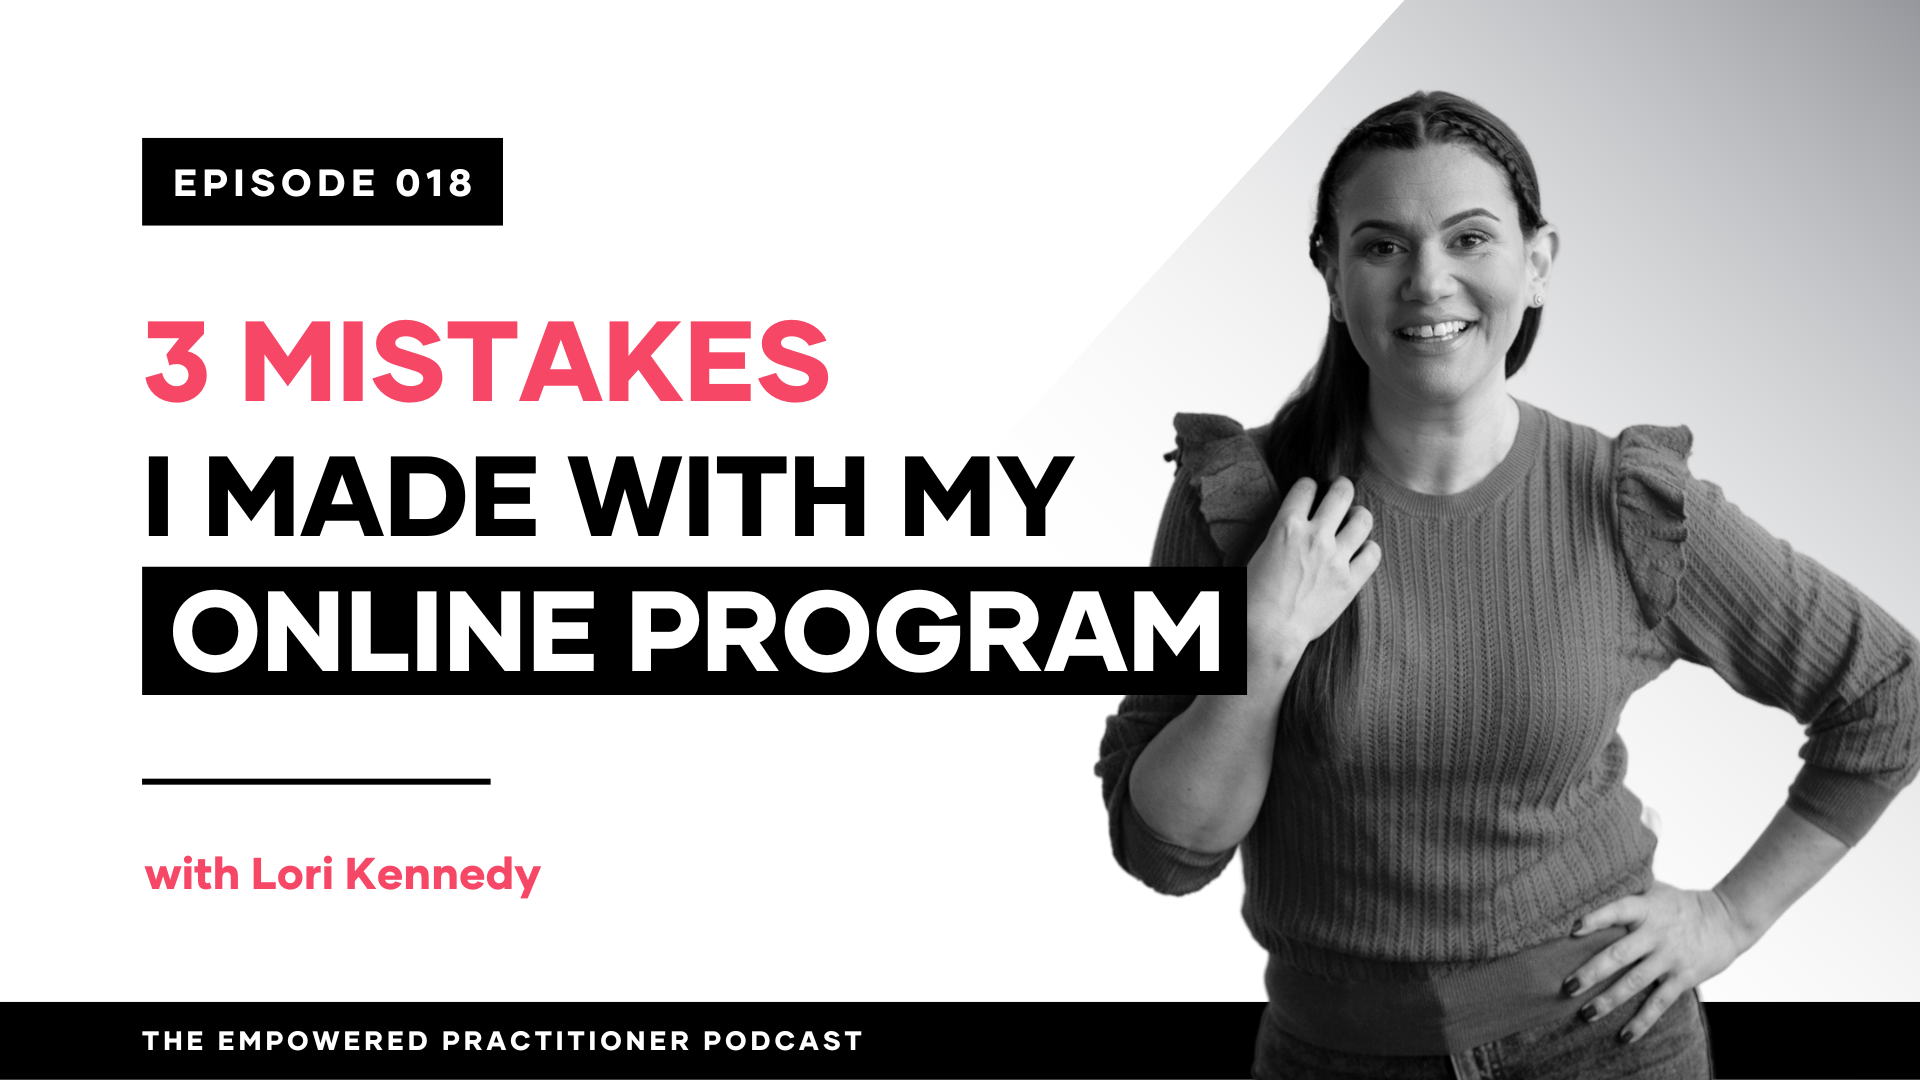 3 mistakes I made with my online program